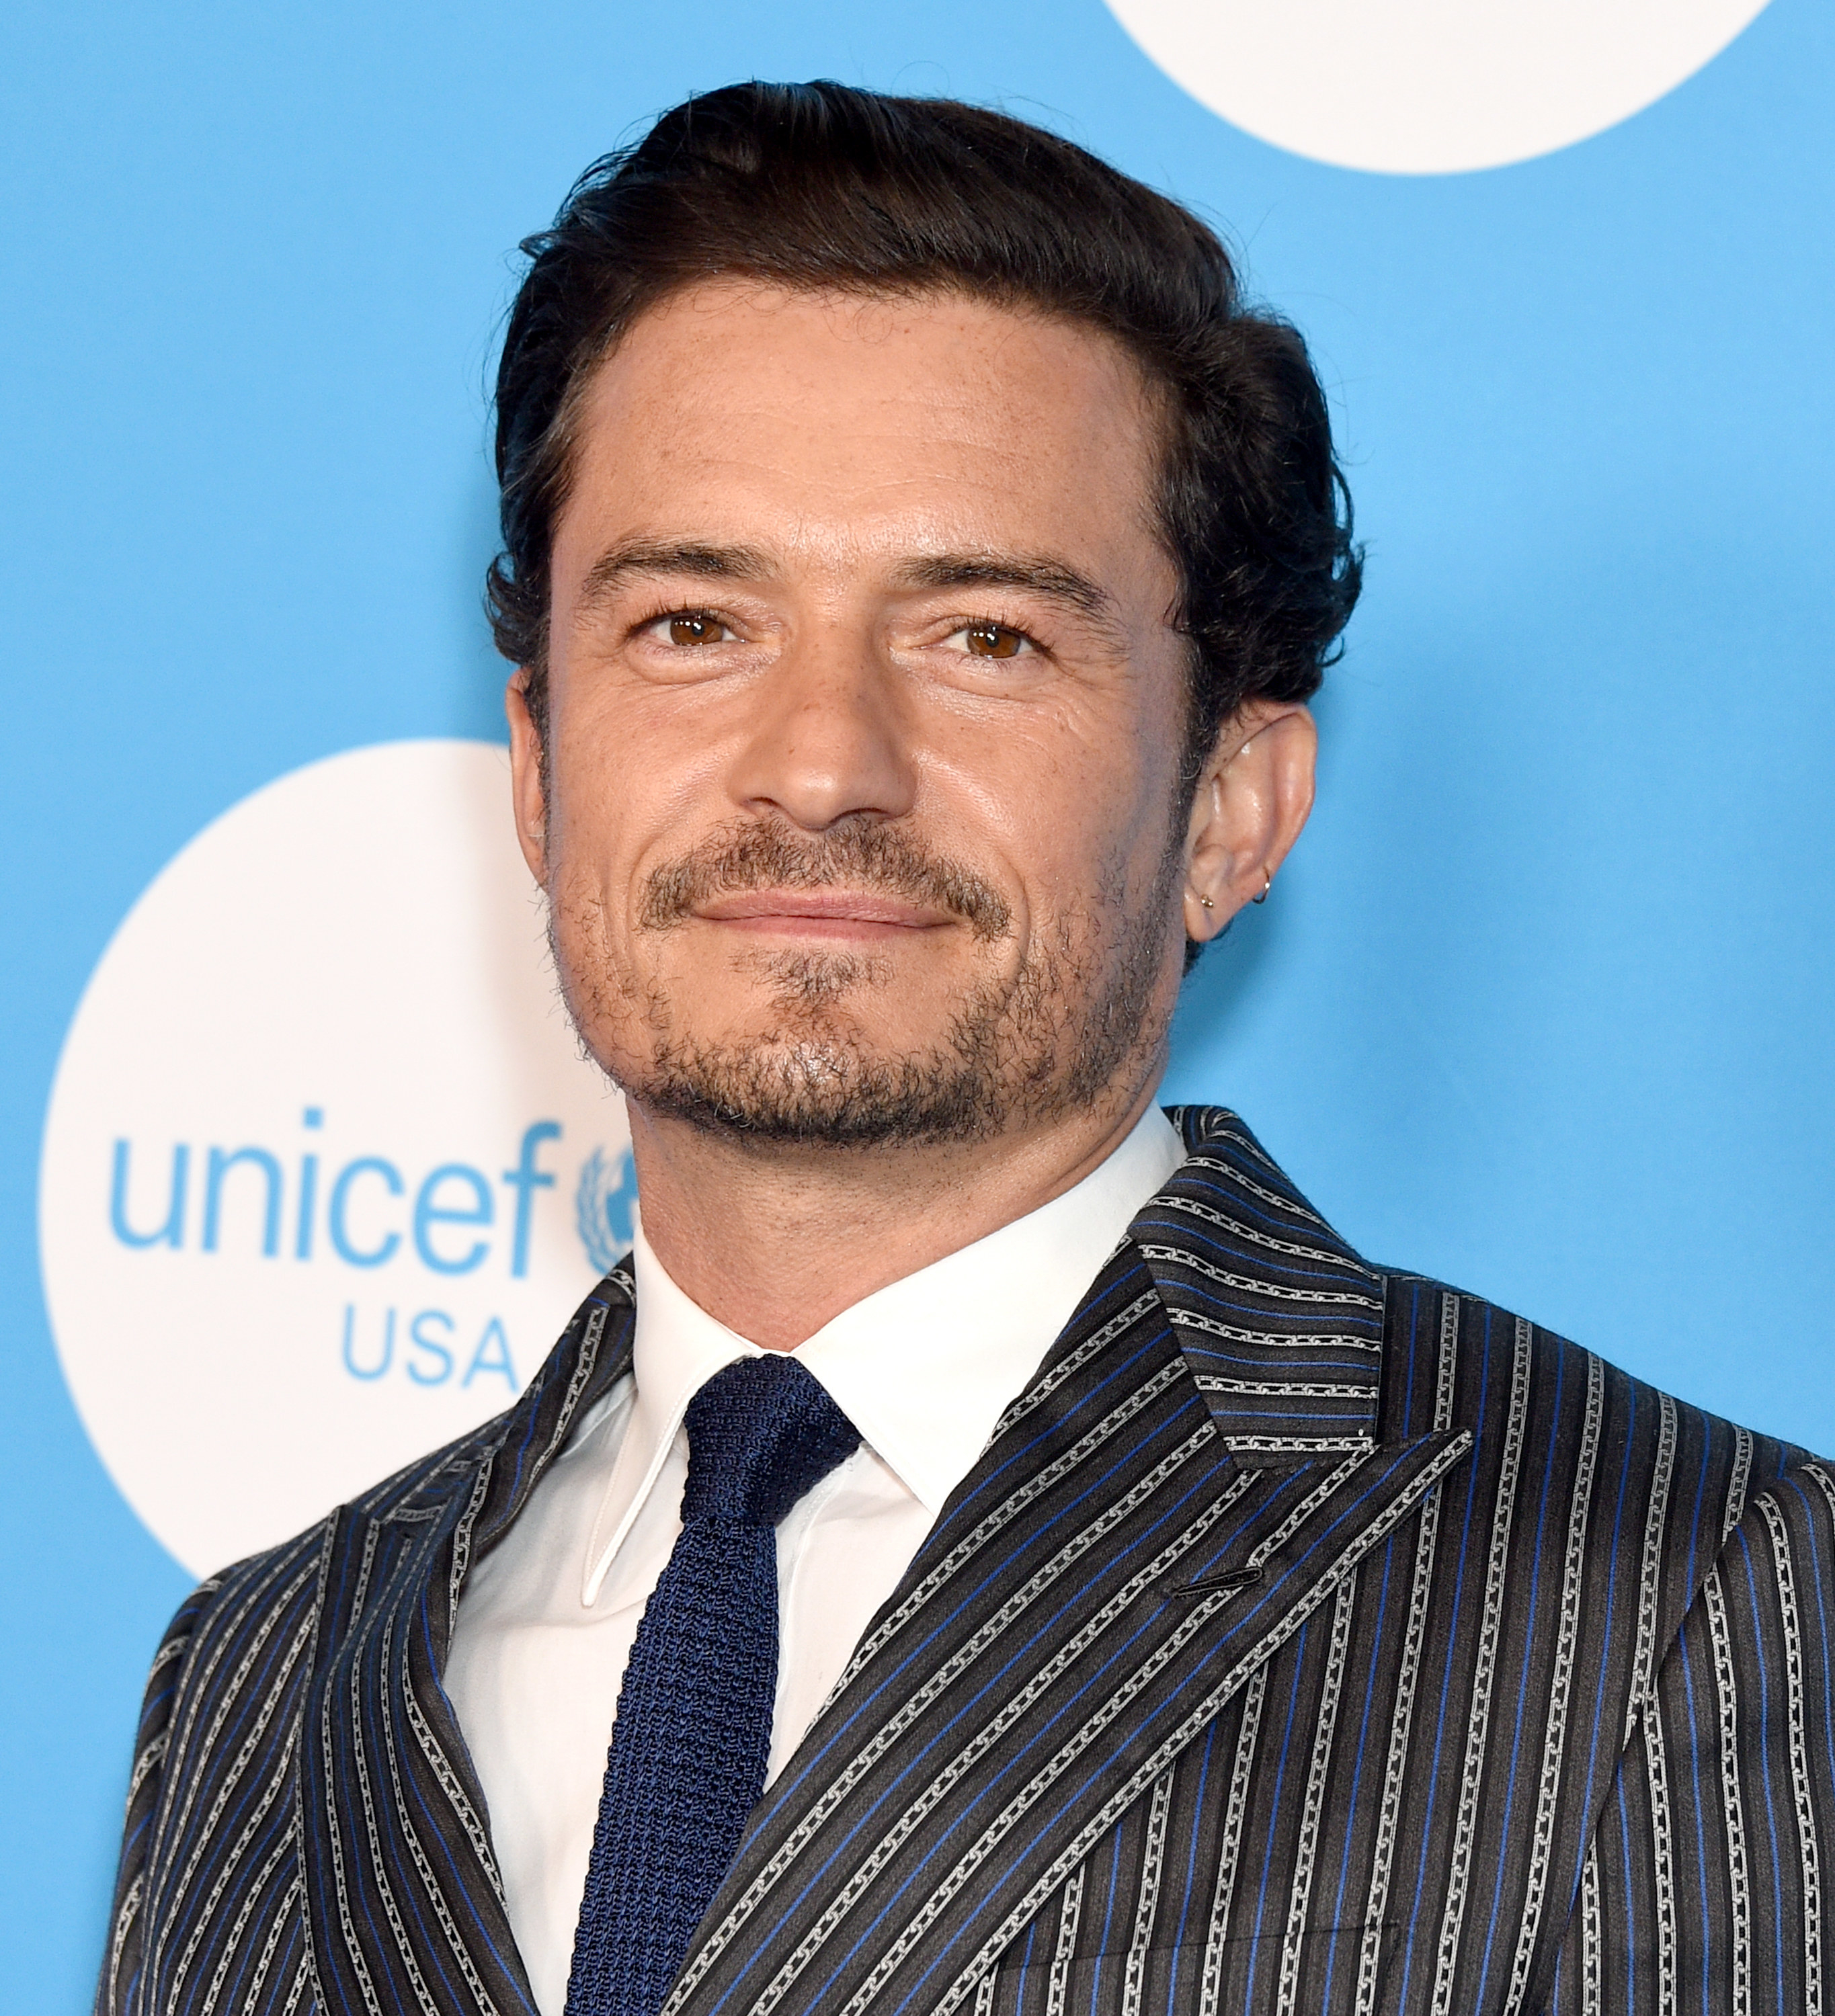 Orlando Bloom poses at the UNICEF At 75 event on November 30, 2021